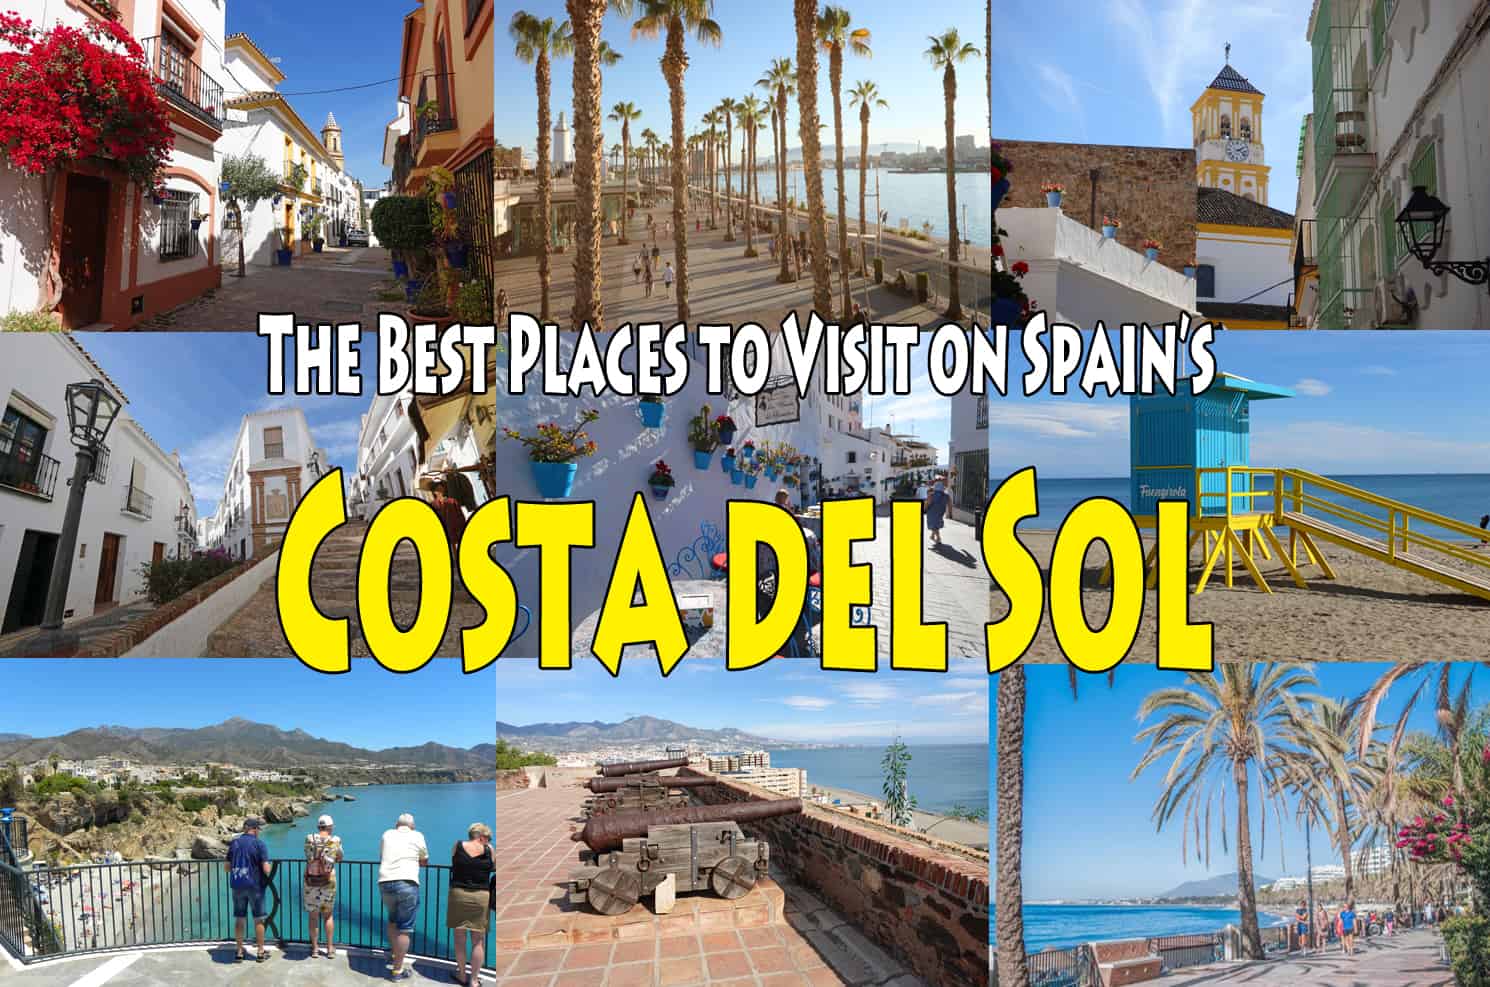 The Best Places to Visit on Spain’s Costa del Sol